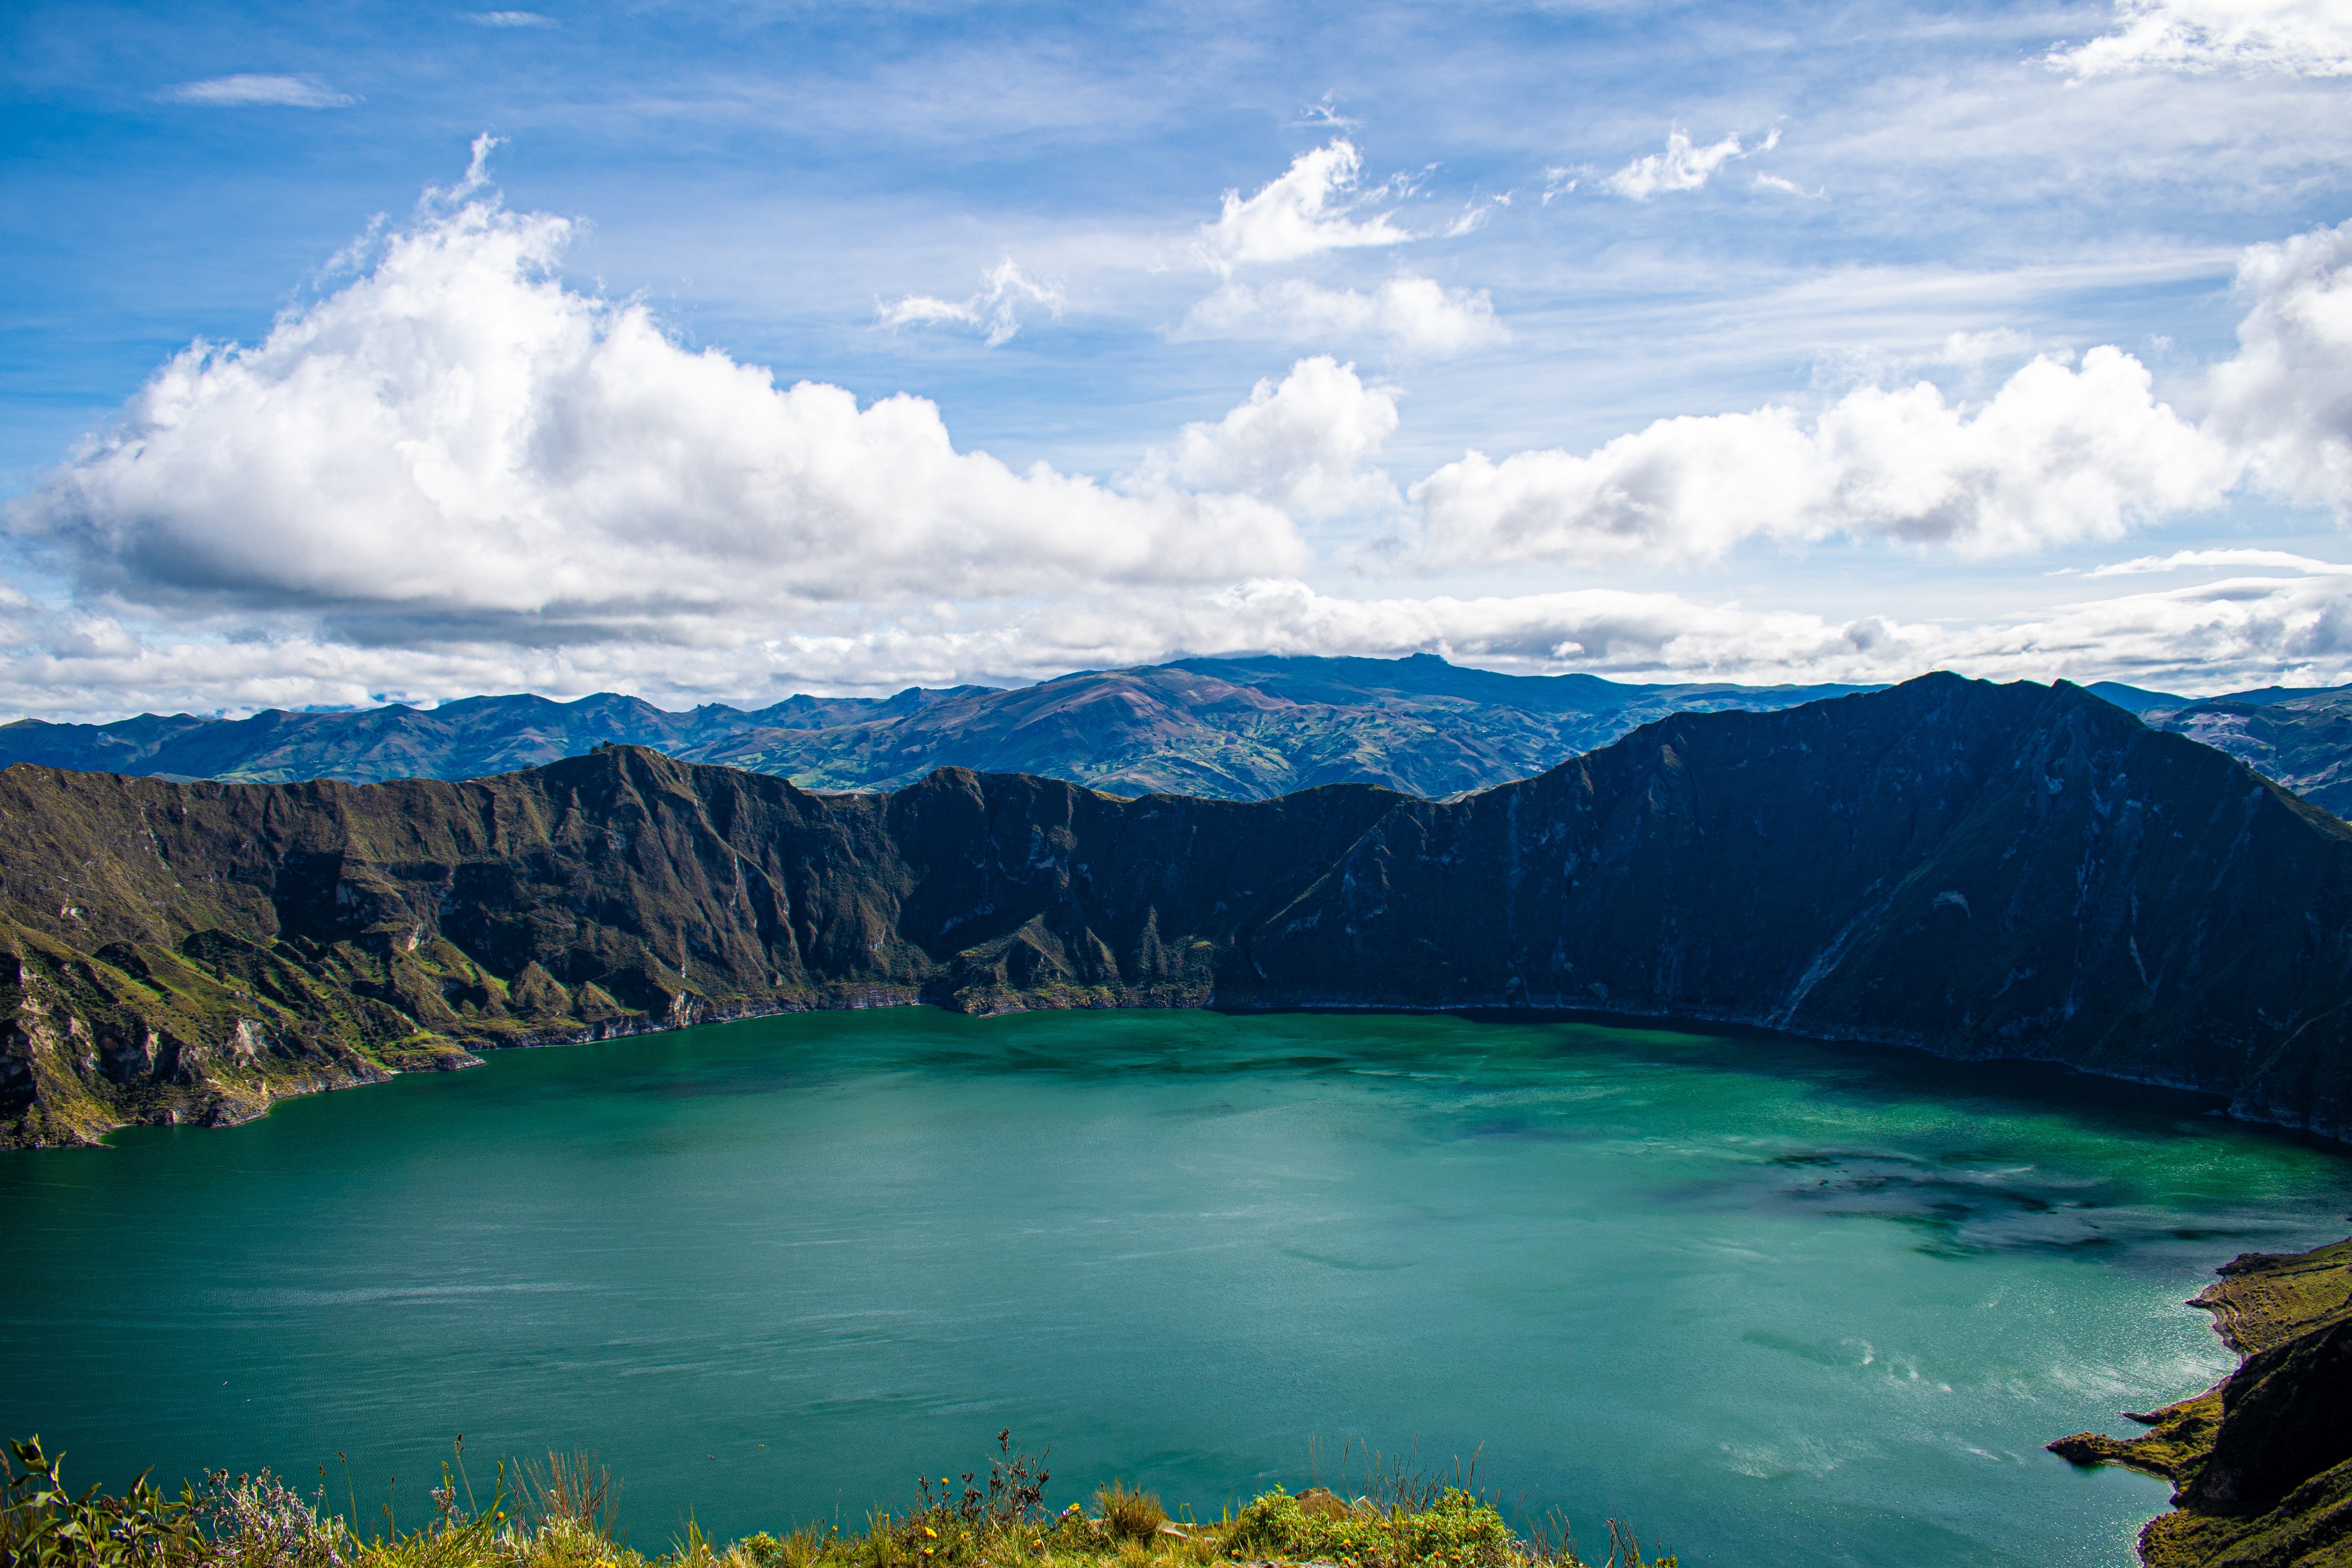 The Quilotoa Lagoon was formed after an eruption 800 years ago